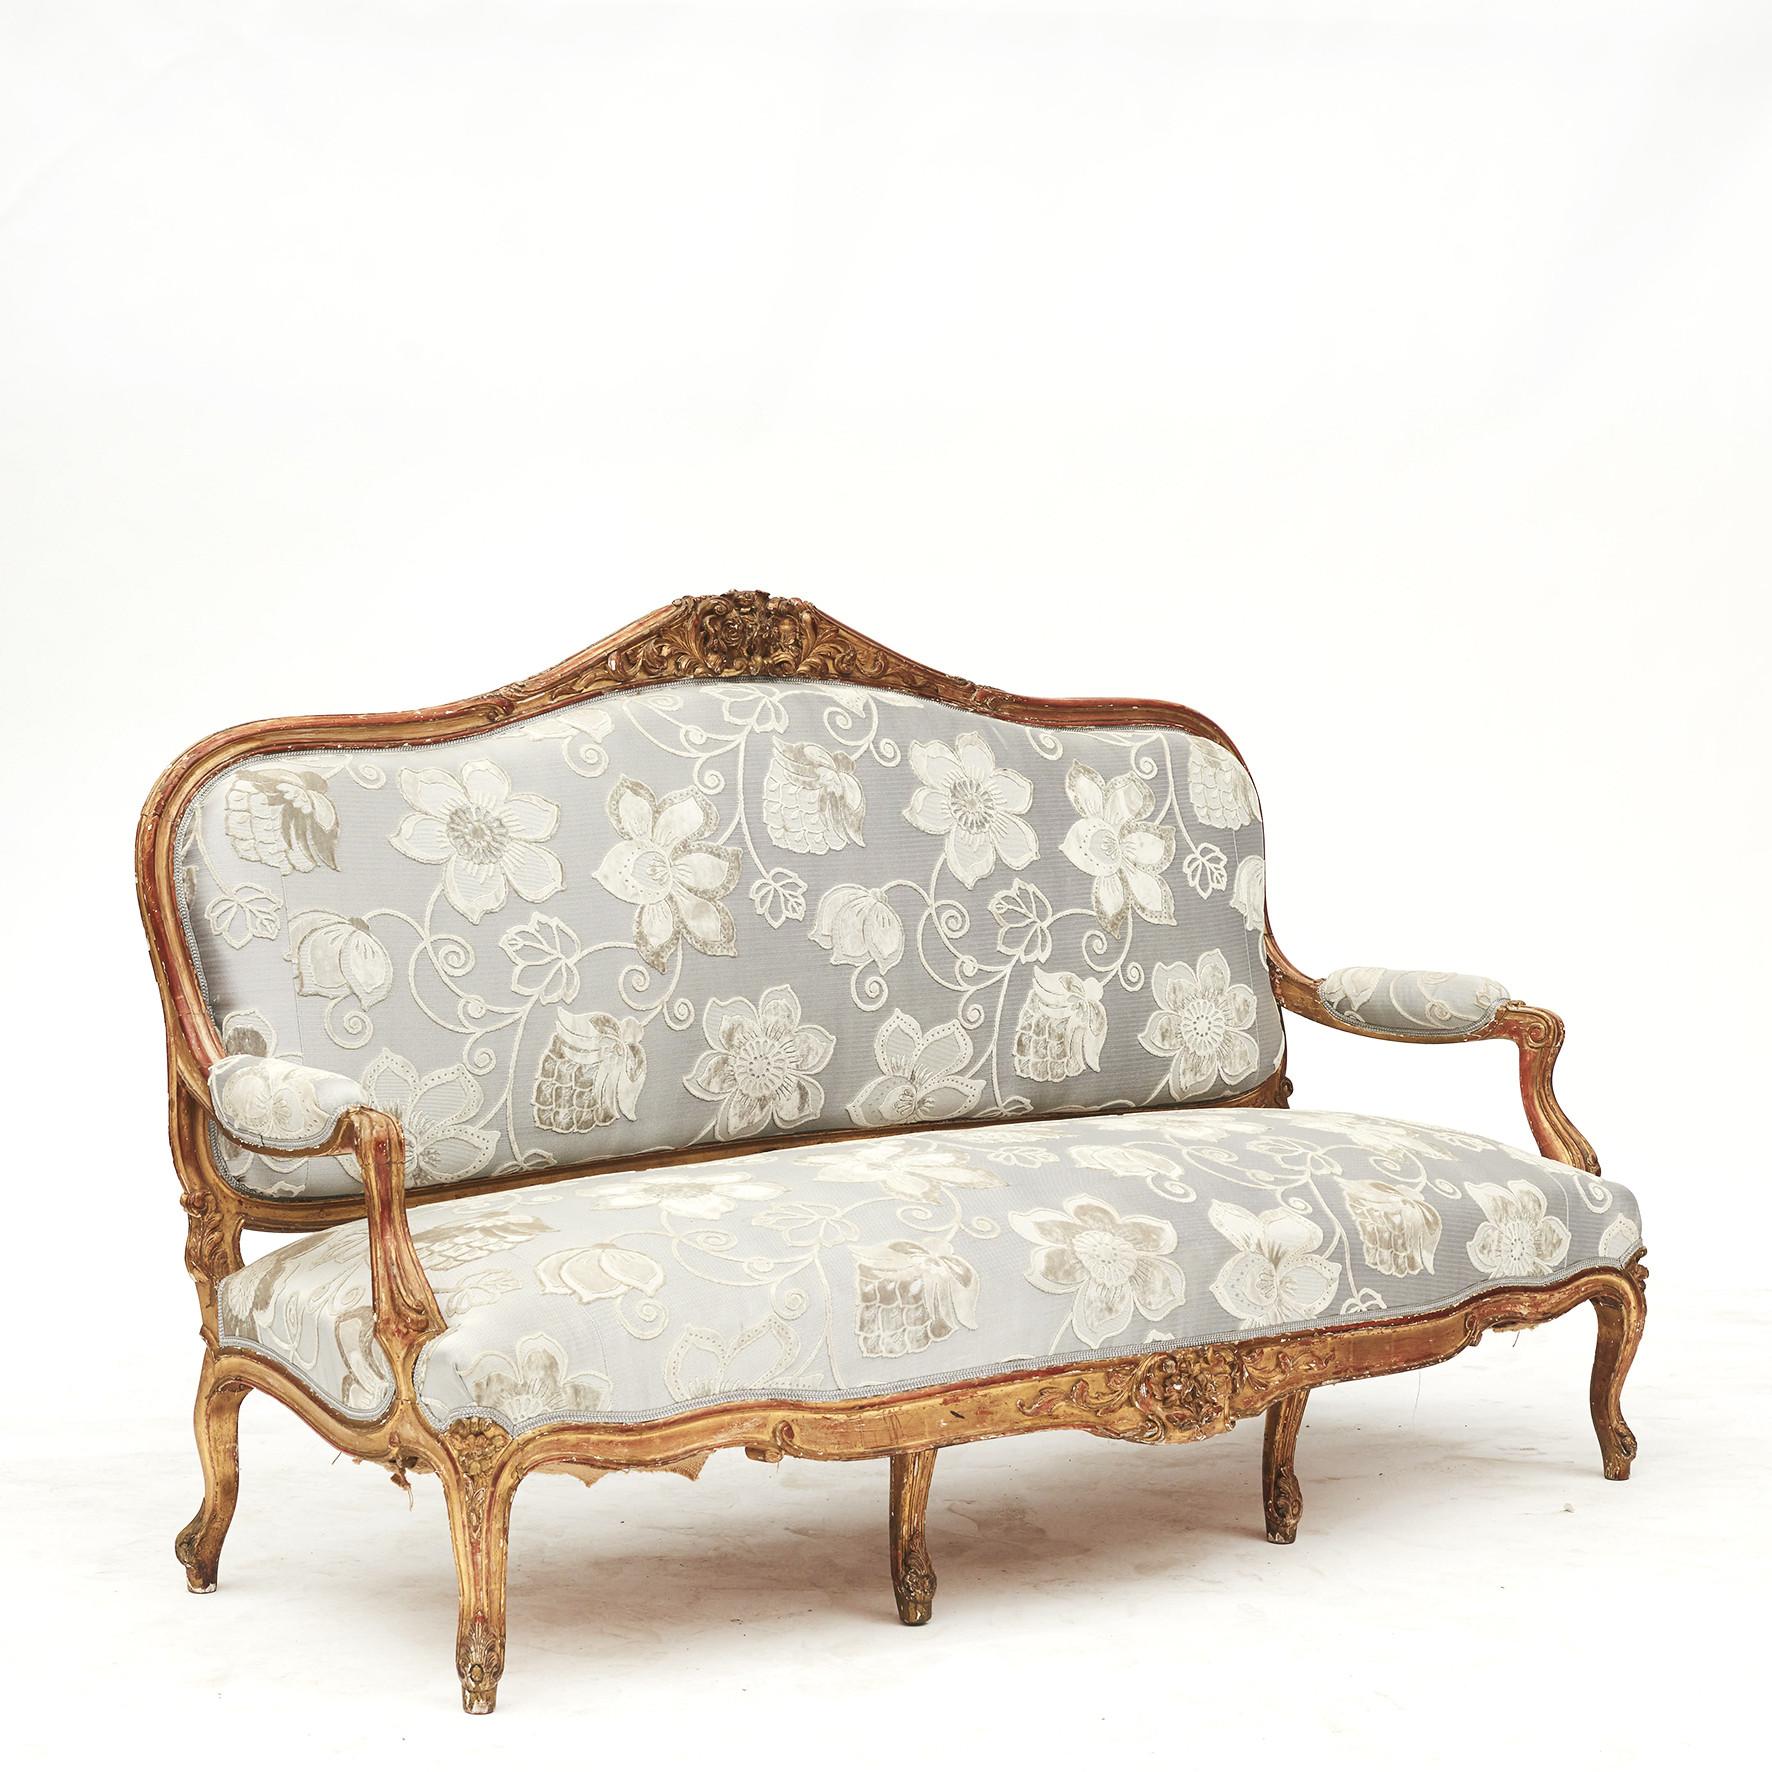 French Rococo style sofa bench decorated with carved foliage motifs.
Original gilding with beautiful naturally age-related patina.
Upholstered with textile from Carlucci.
France, 1840-1860.